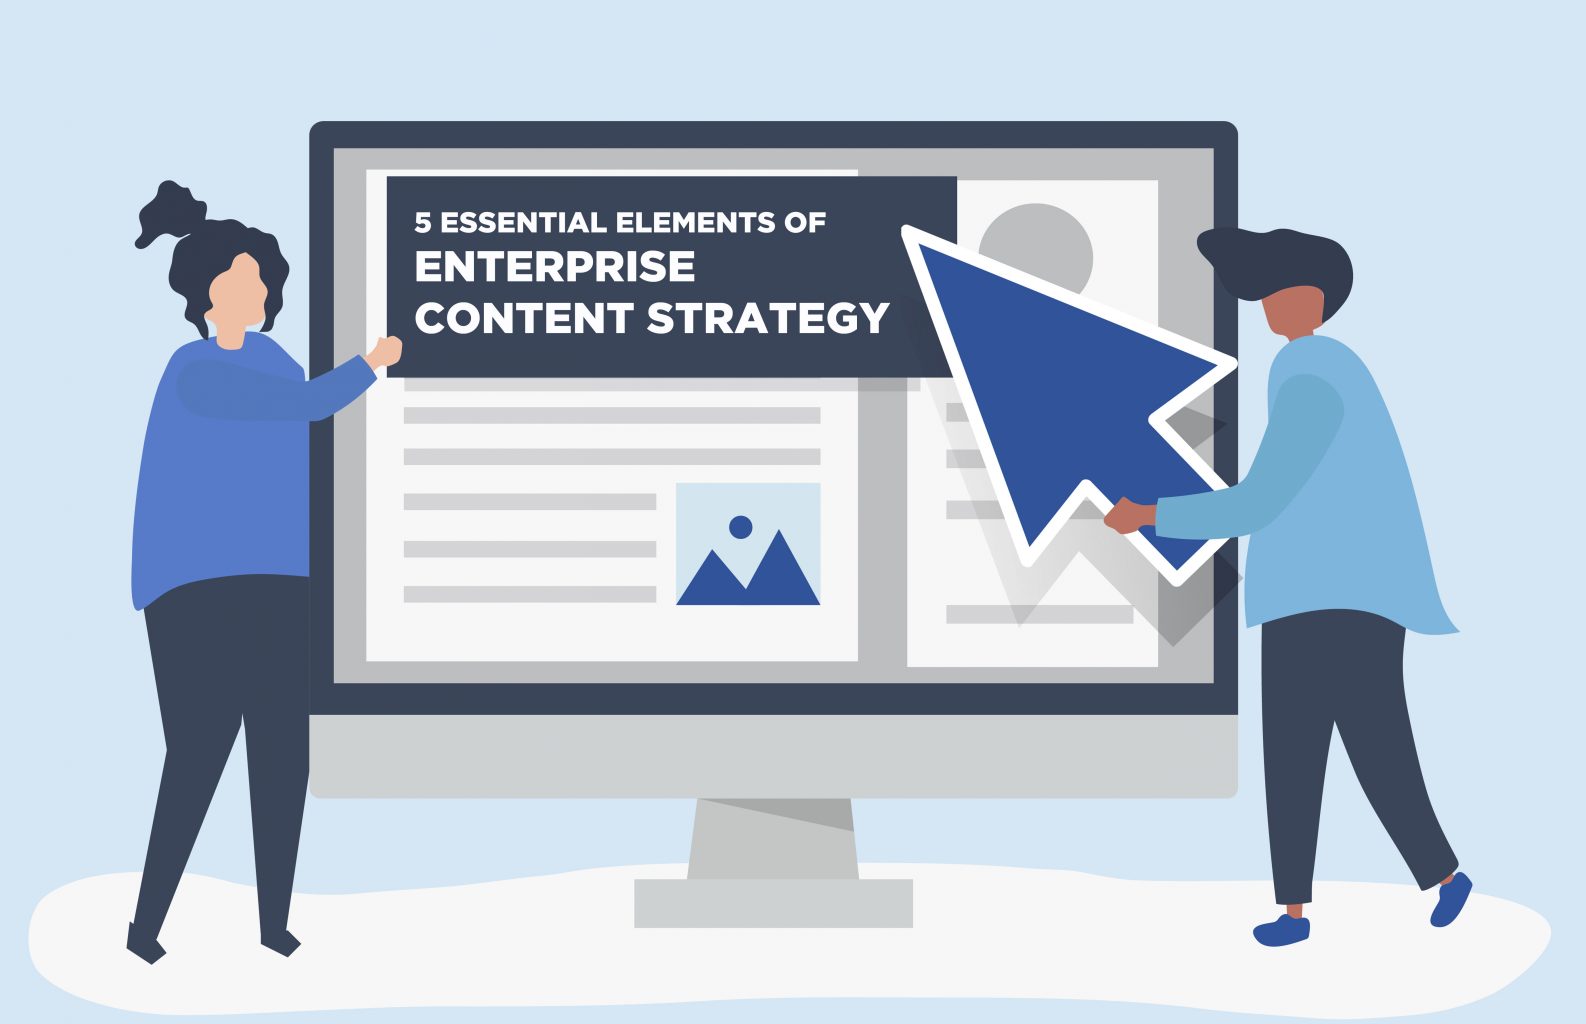 A good enterprise content strategy enhances SEO for key acquisition terms and helps marketers build links.